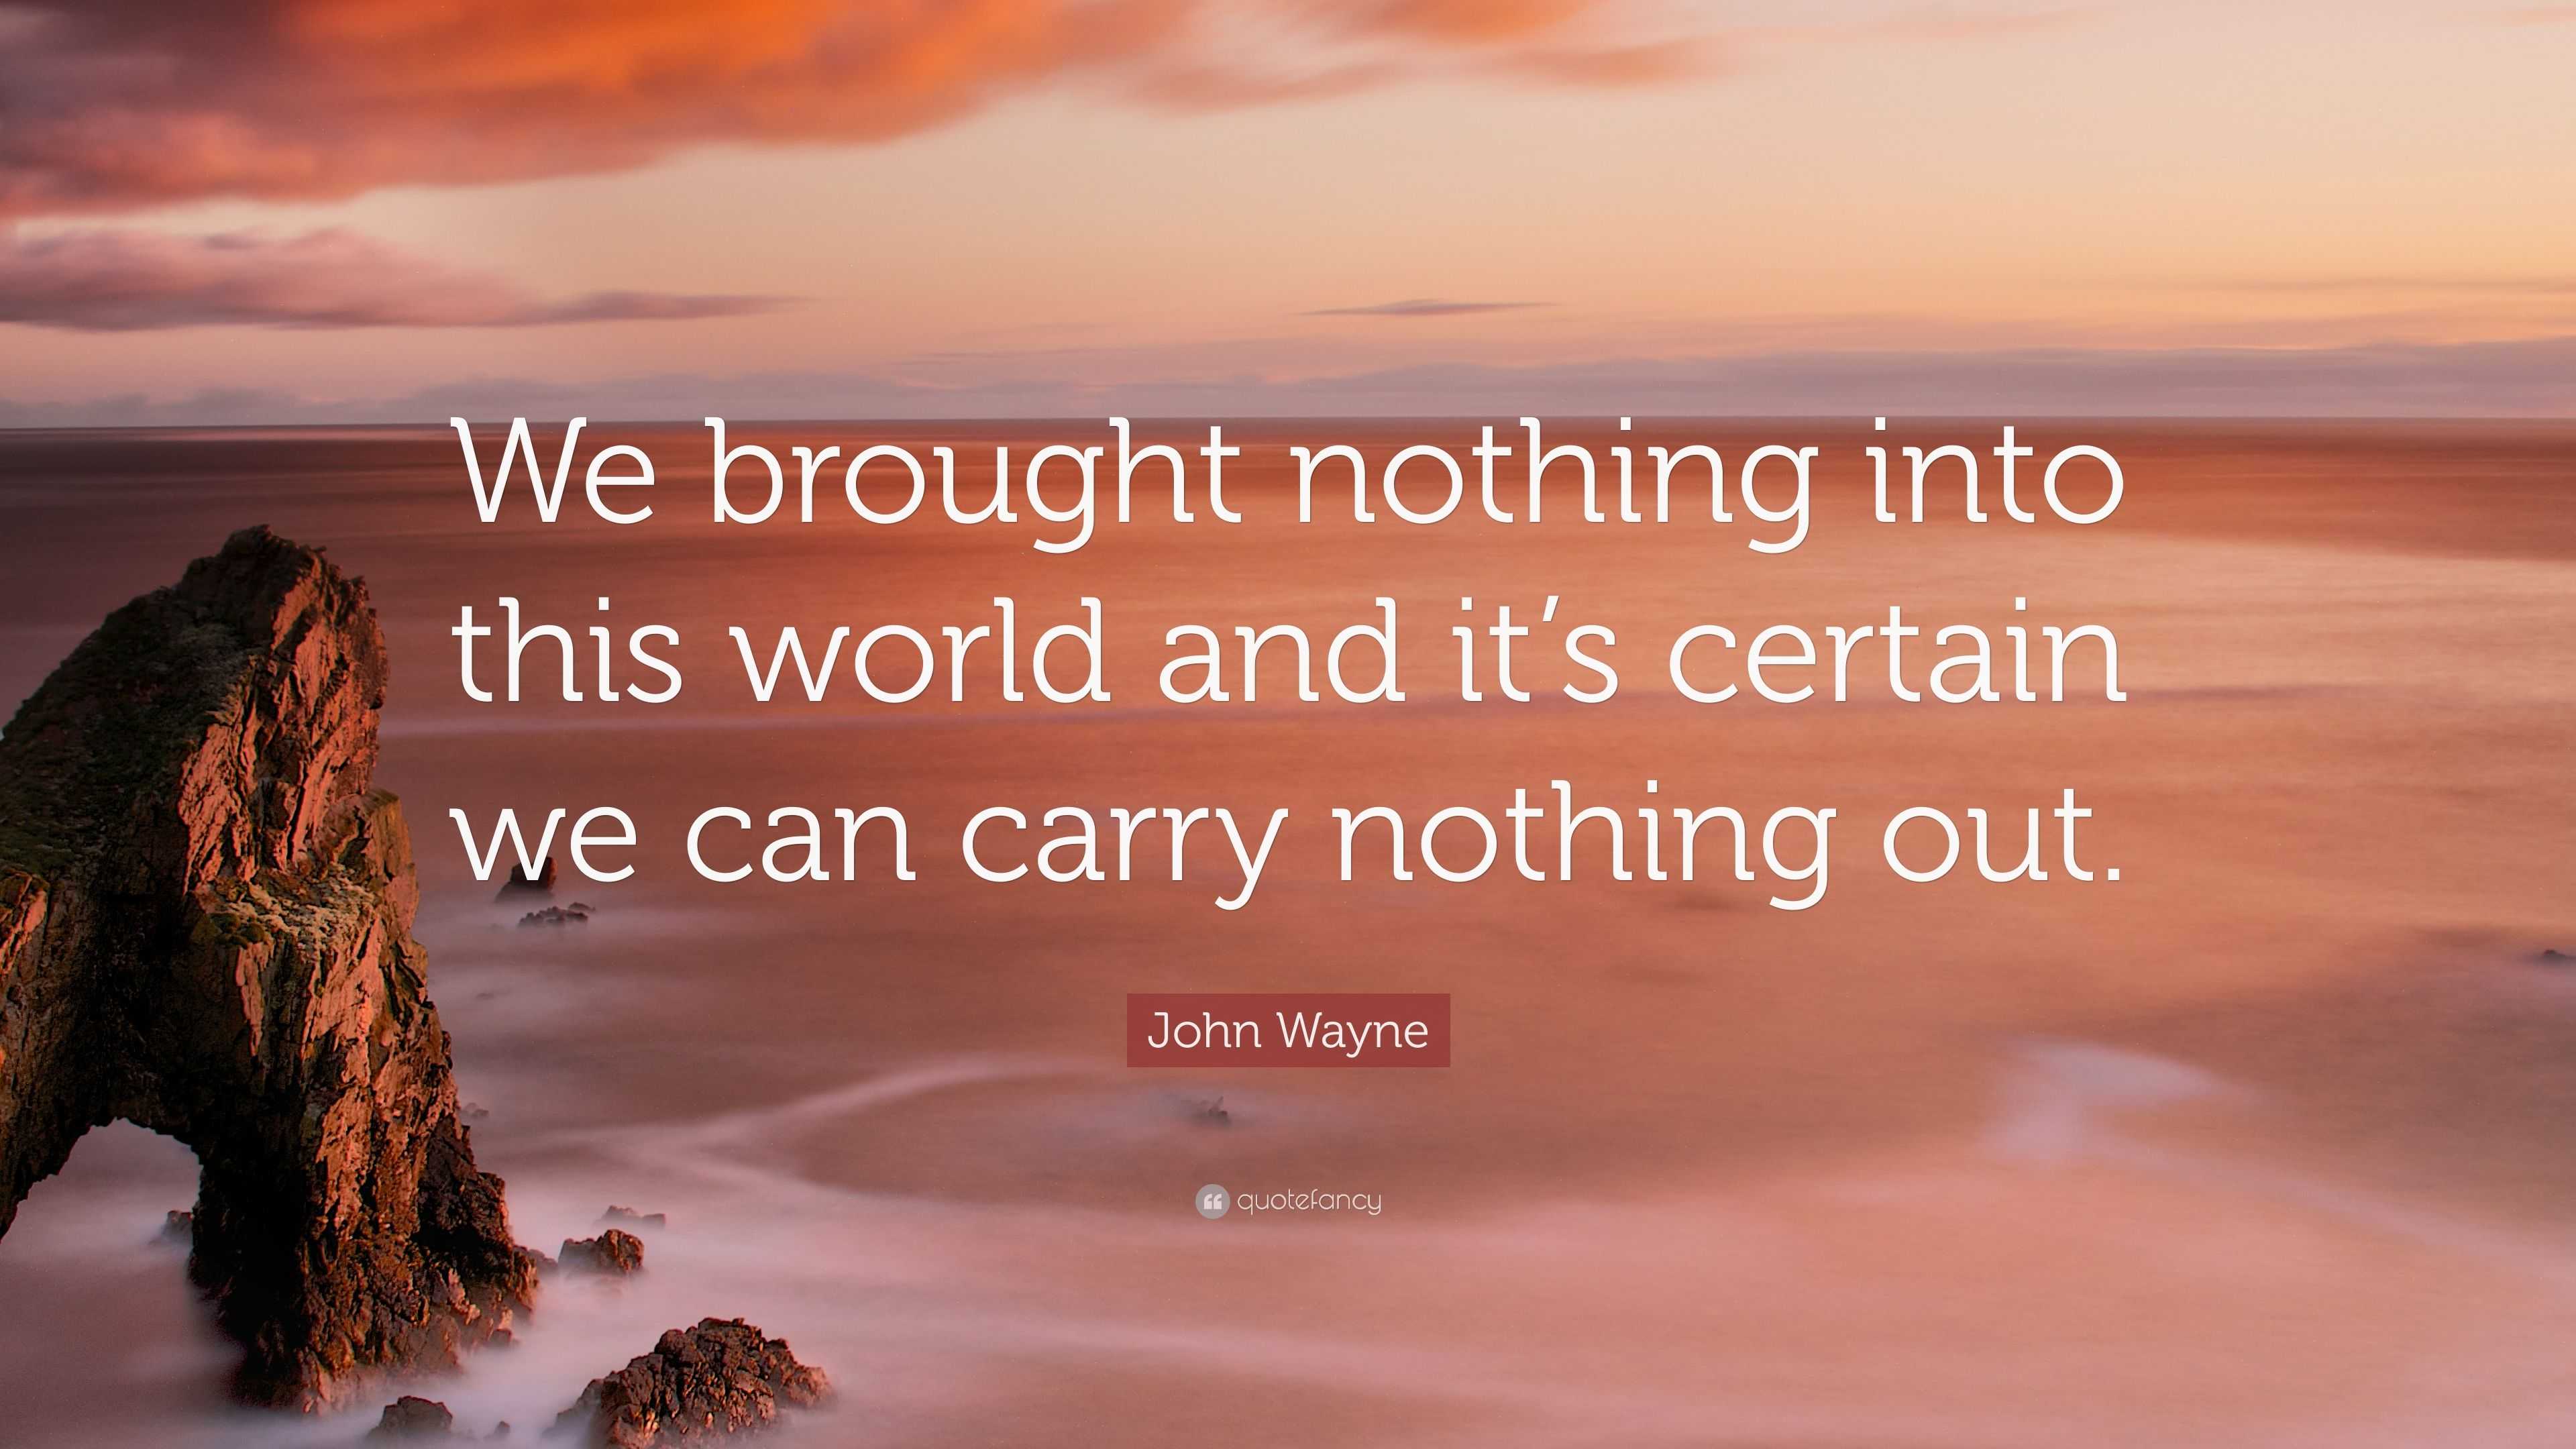 John Wayne Quote “We brought nothing into this world and it’s certain